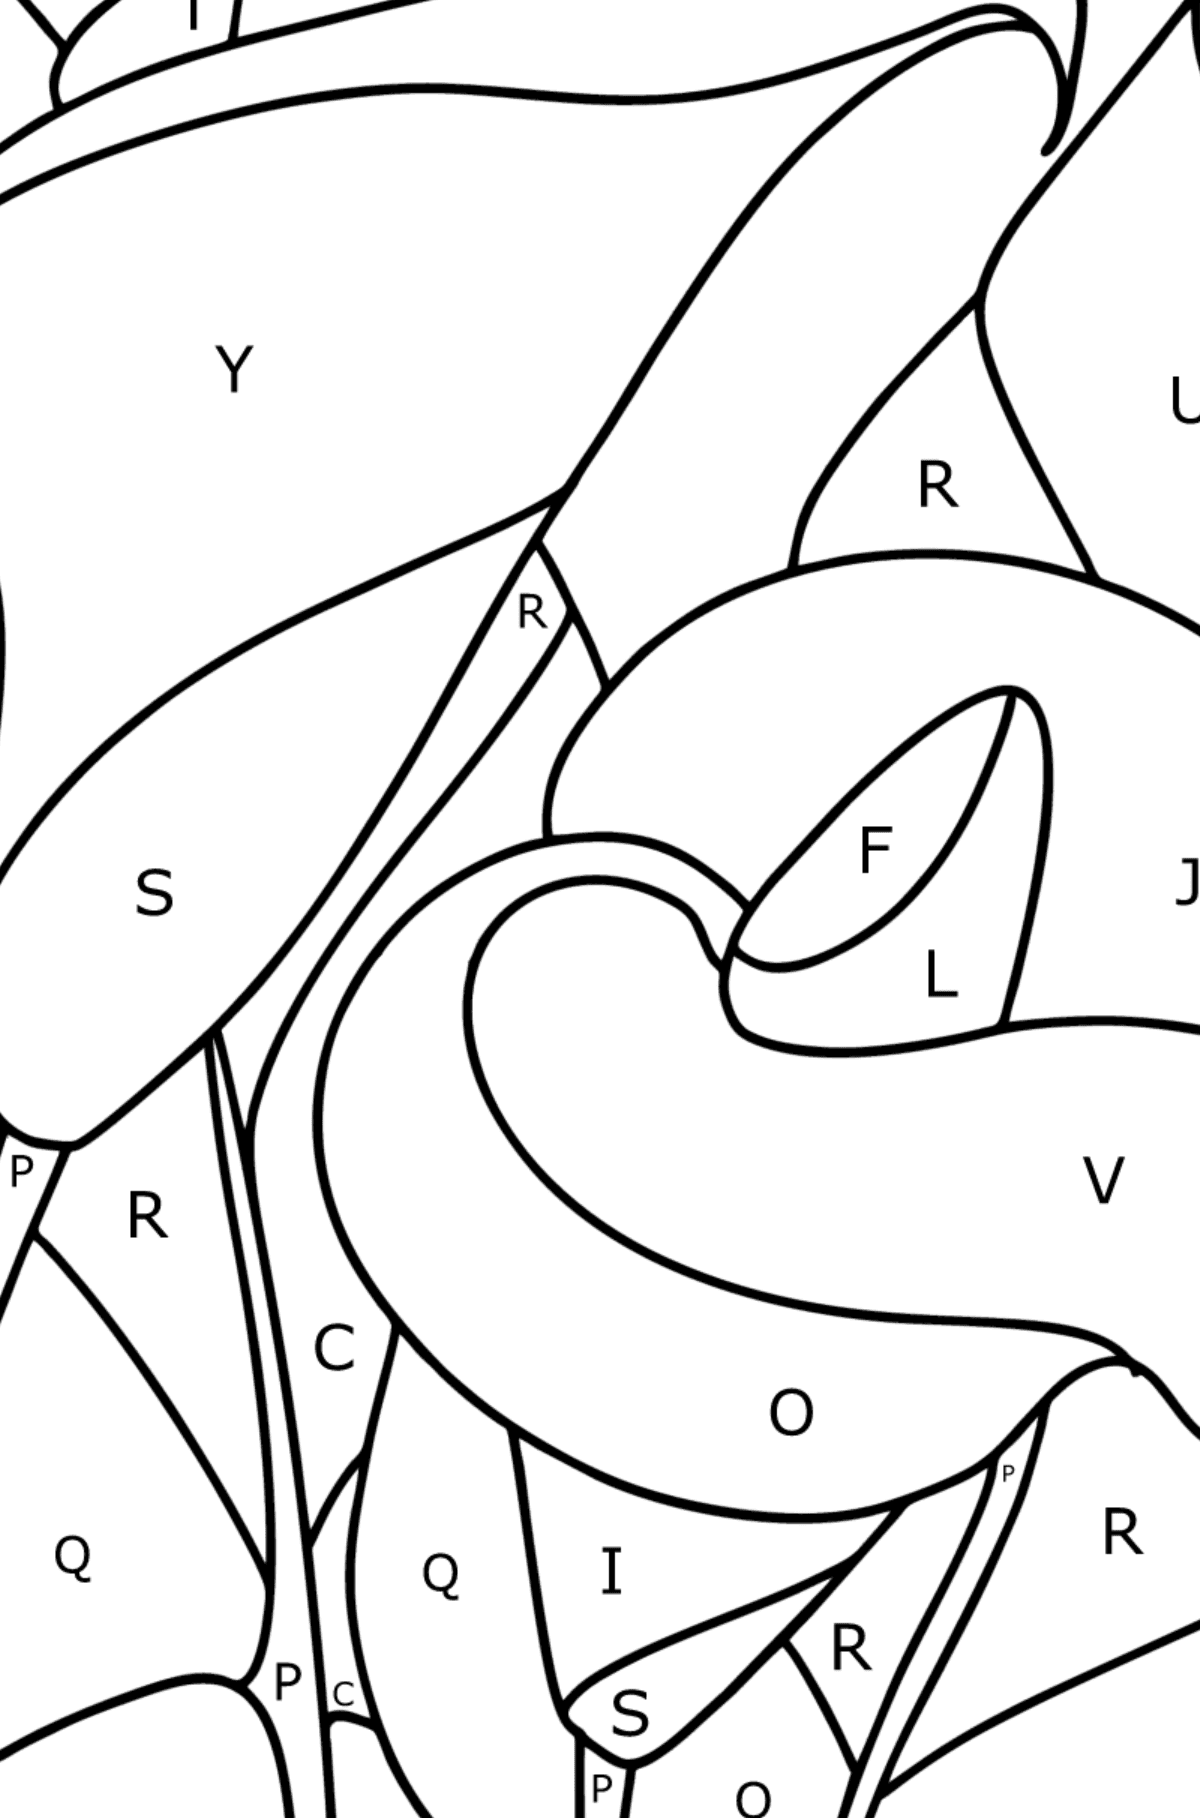 Calla coloring page - Coloring by Letters for Kids